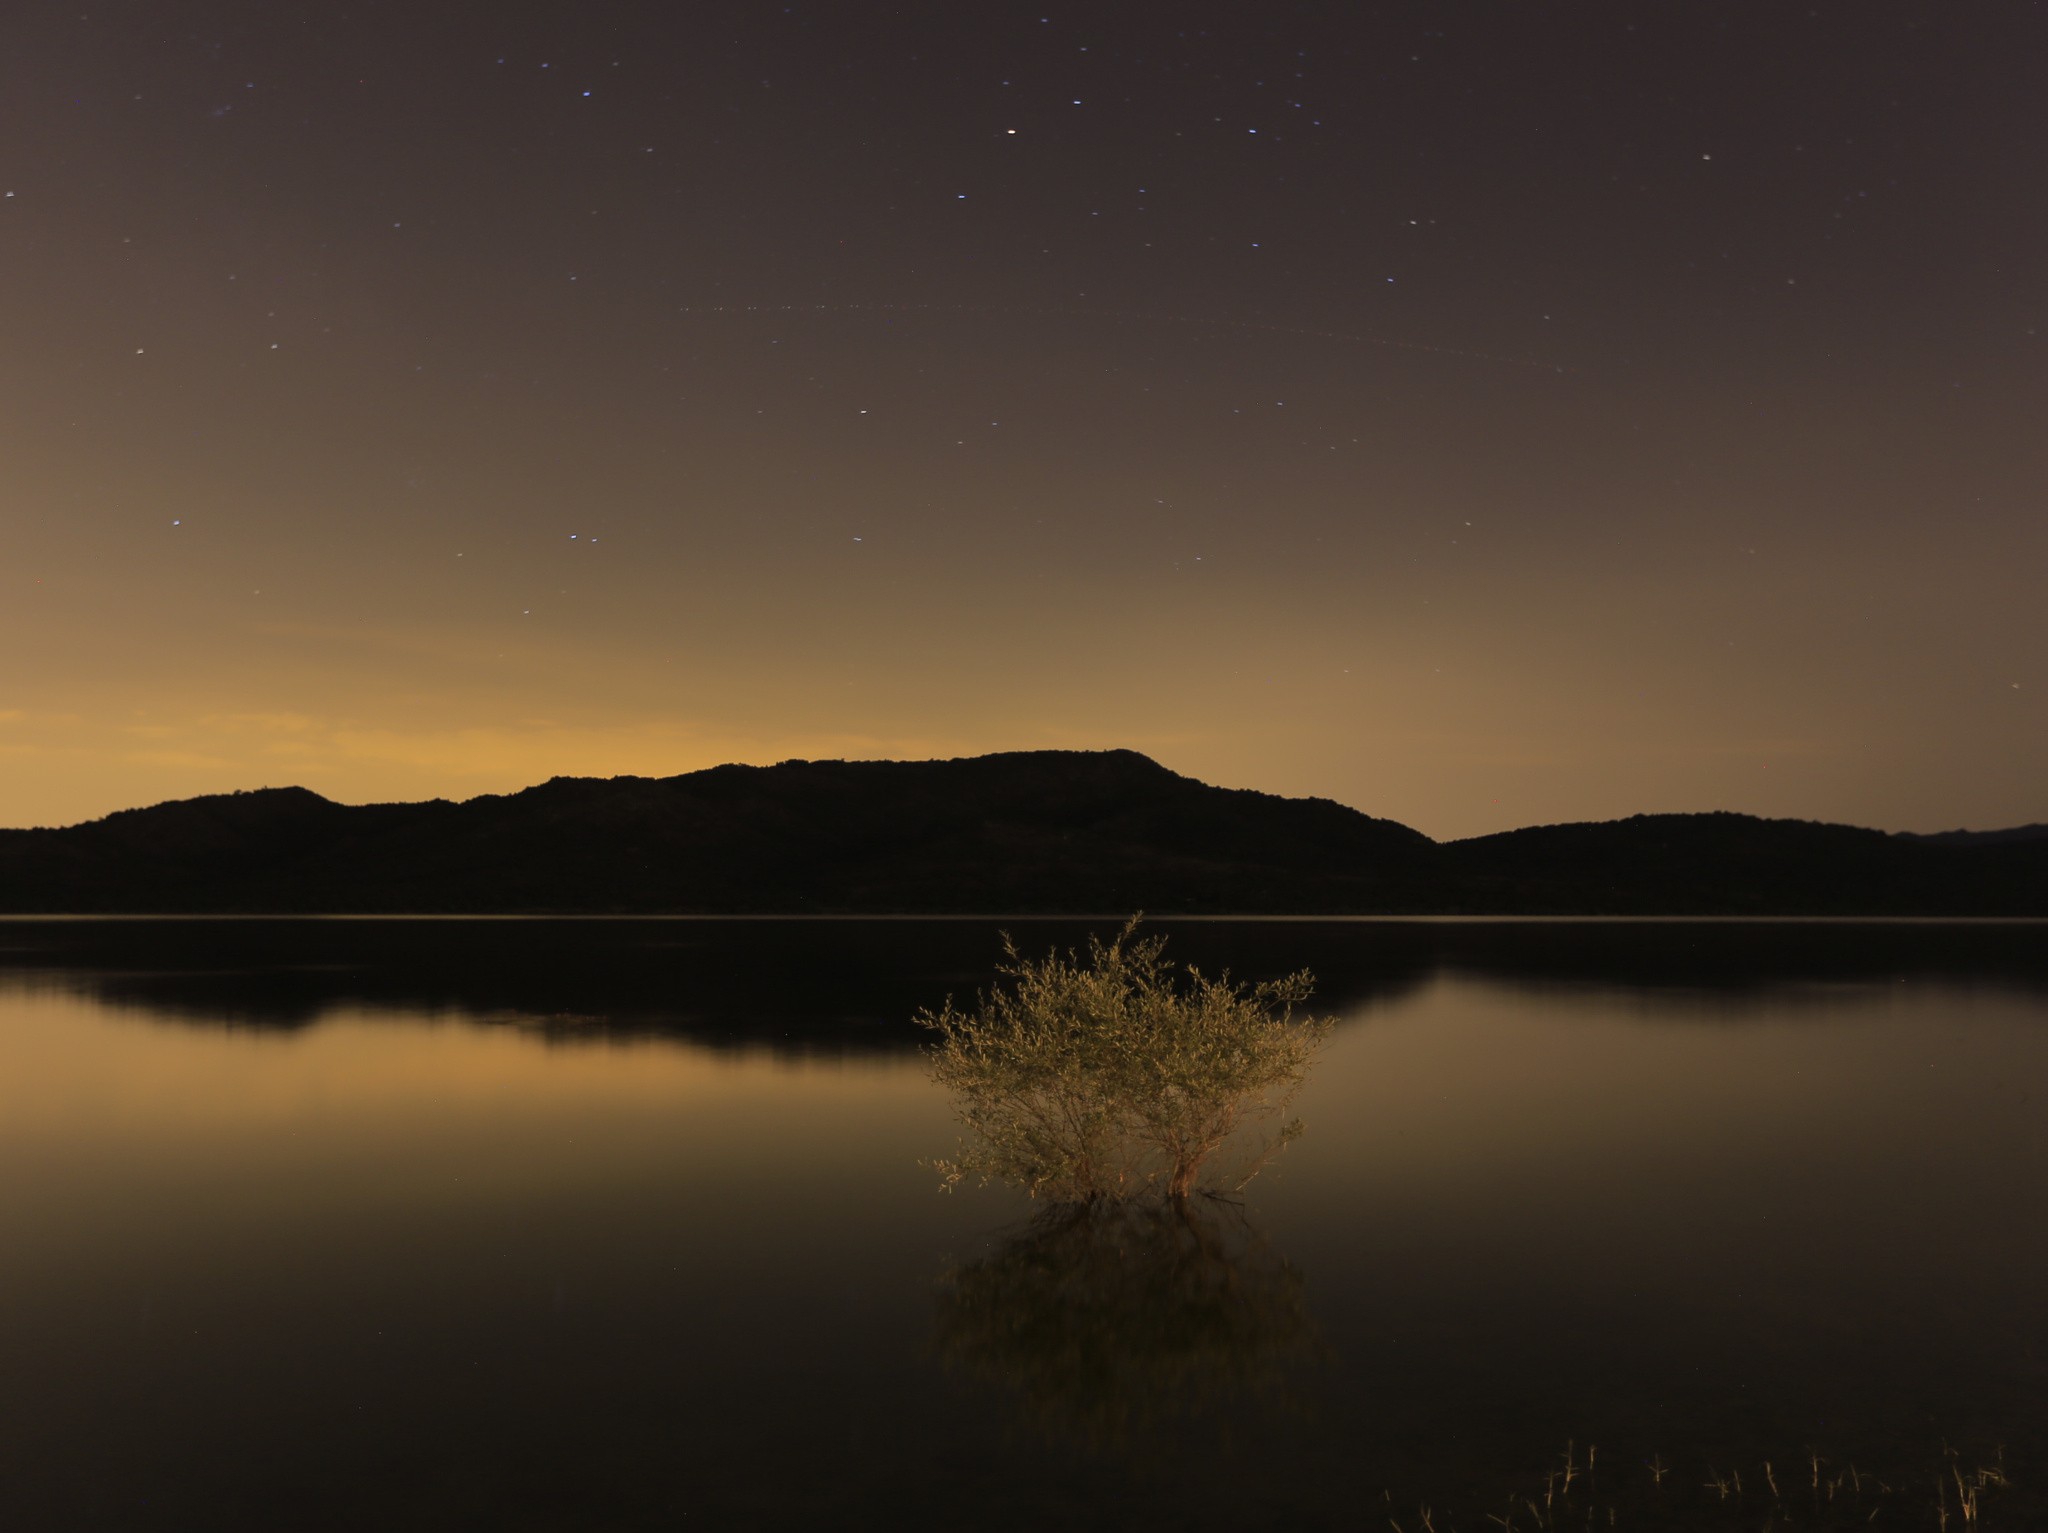 General 2048x1533 nature landscape mountains plants lake reflection clear sky sky stars calm calm waters low light